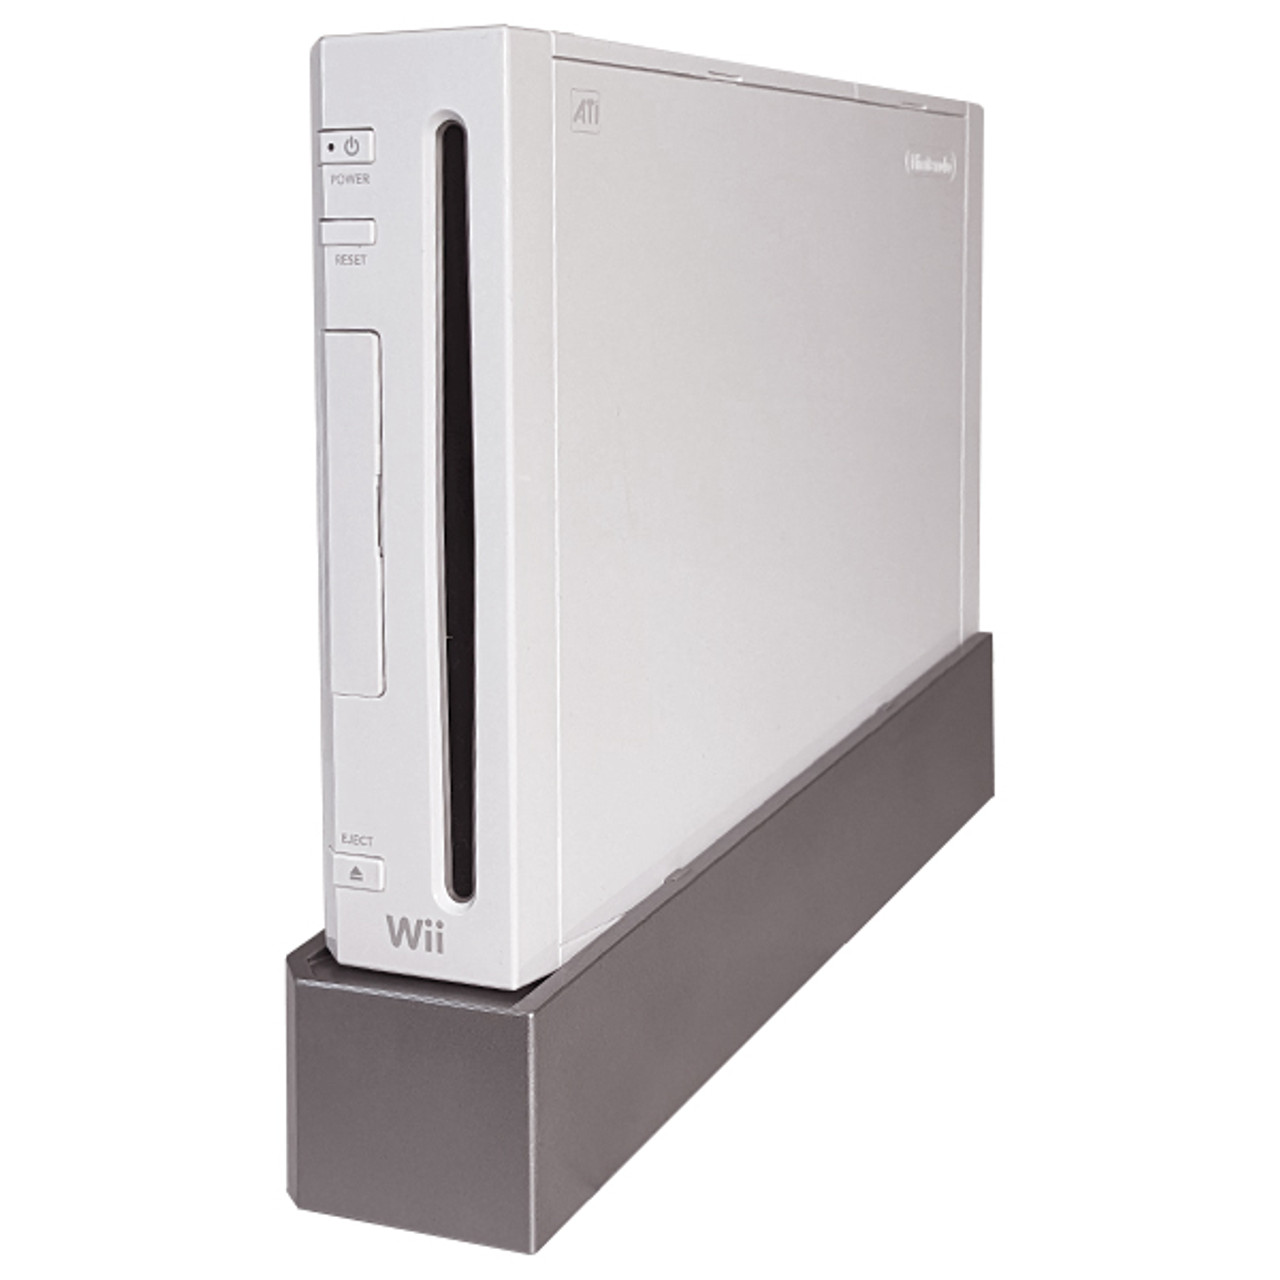 Consoles Used Wii